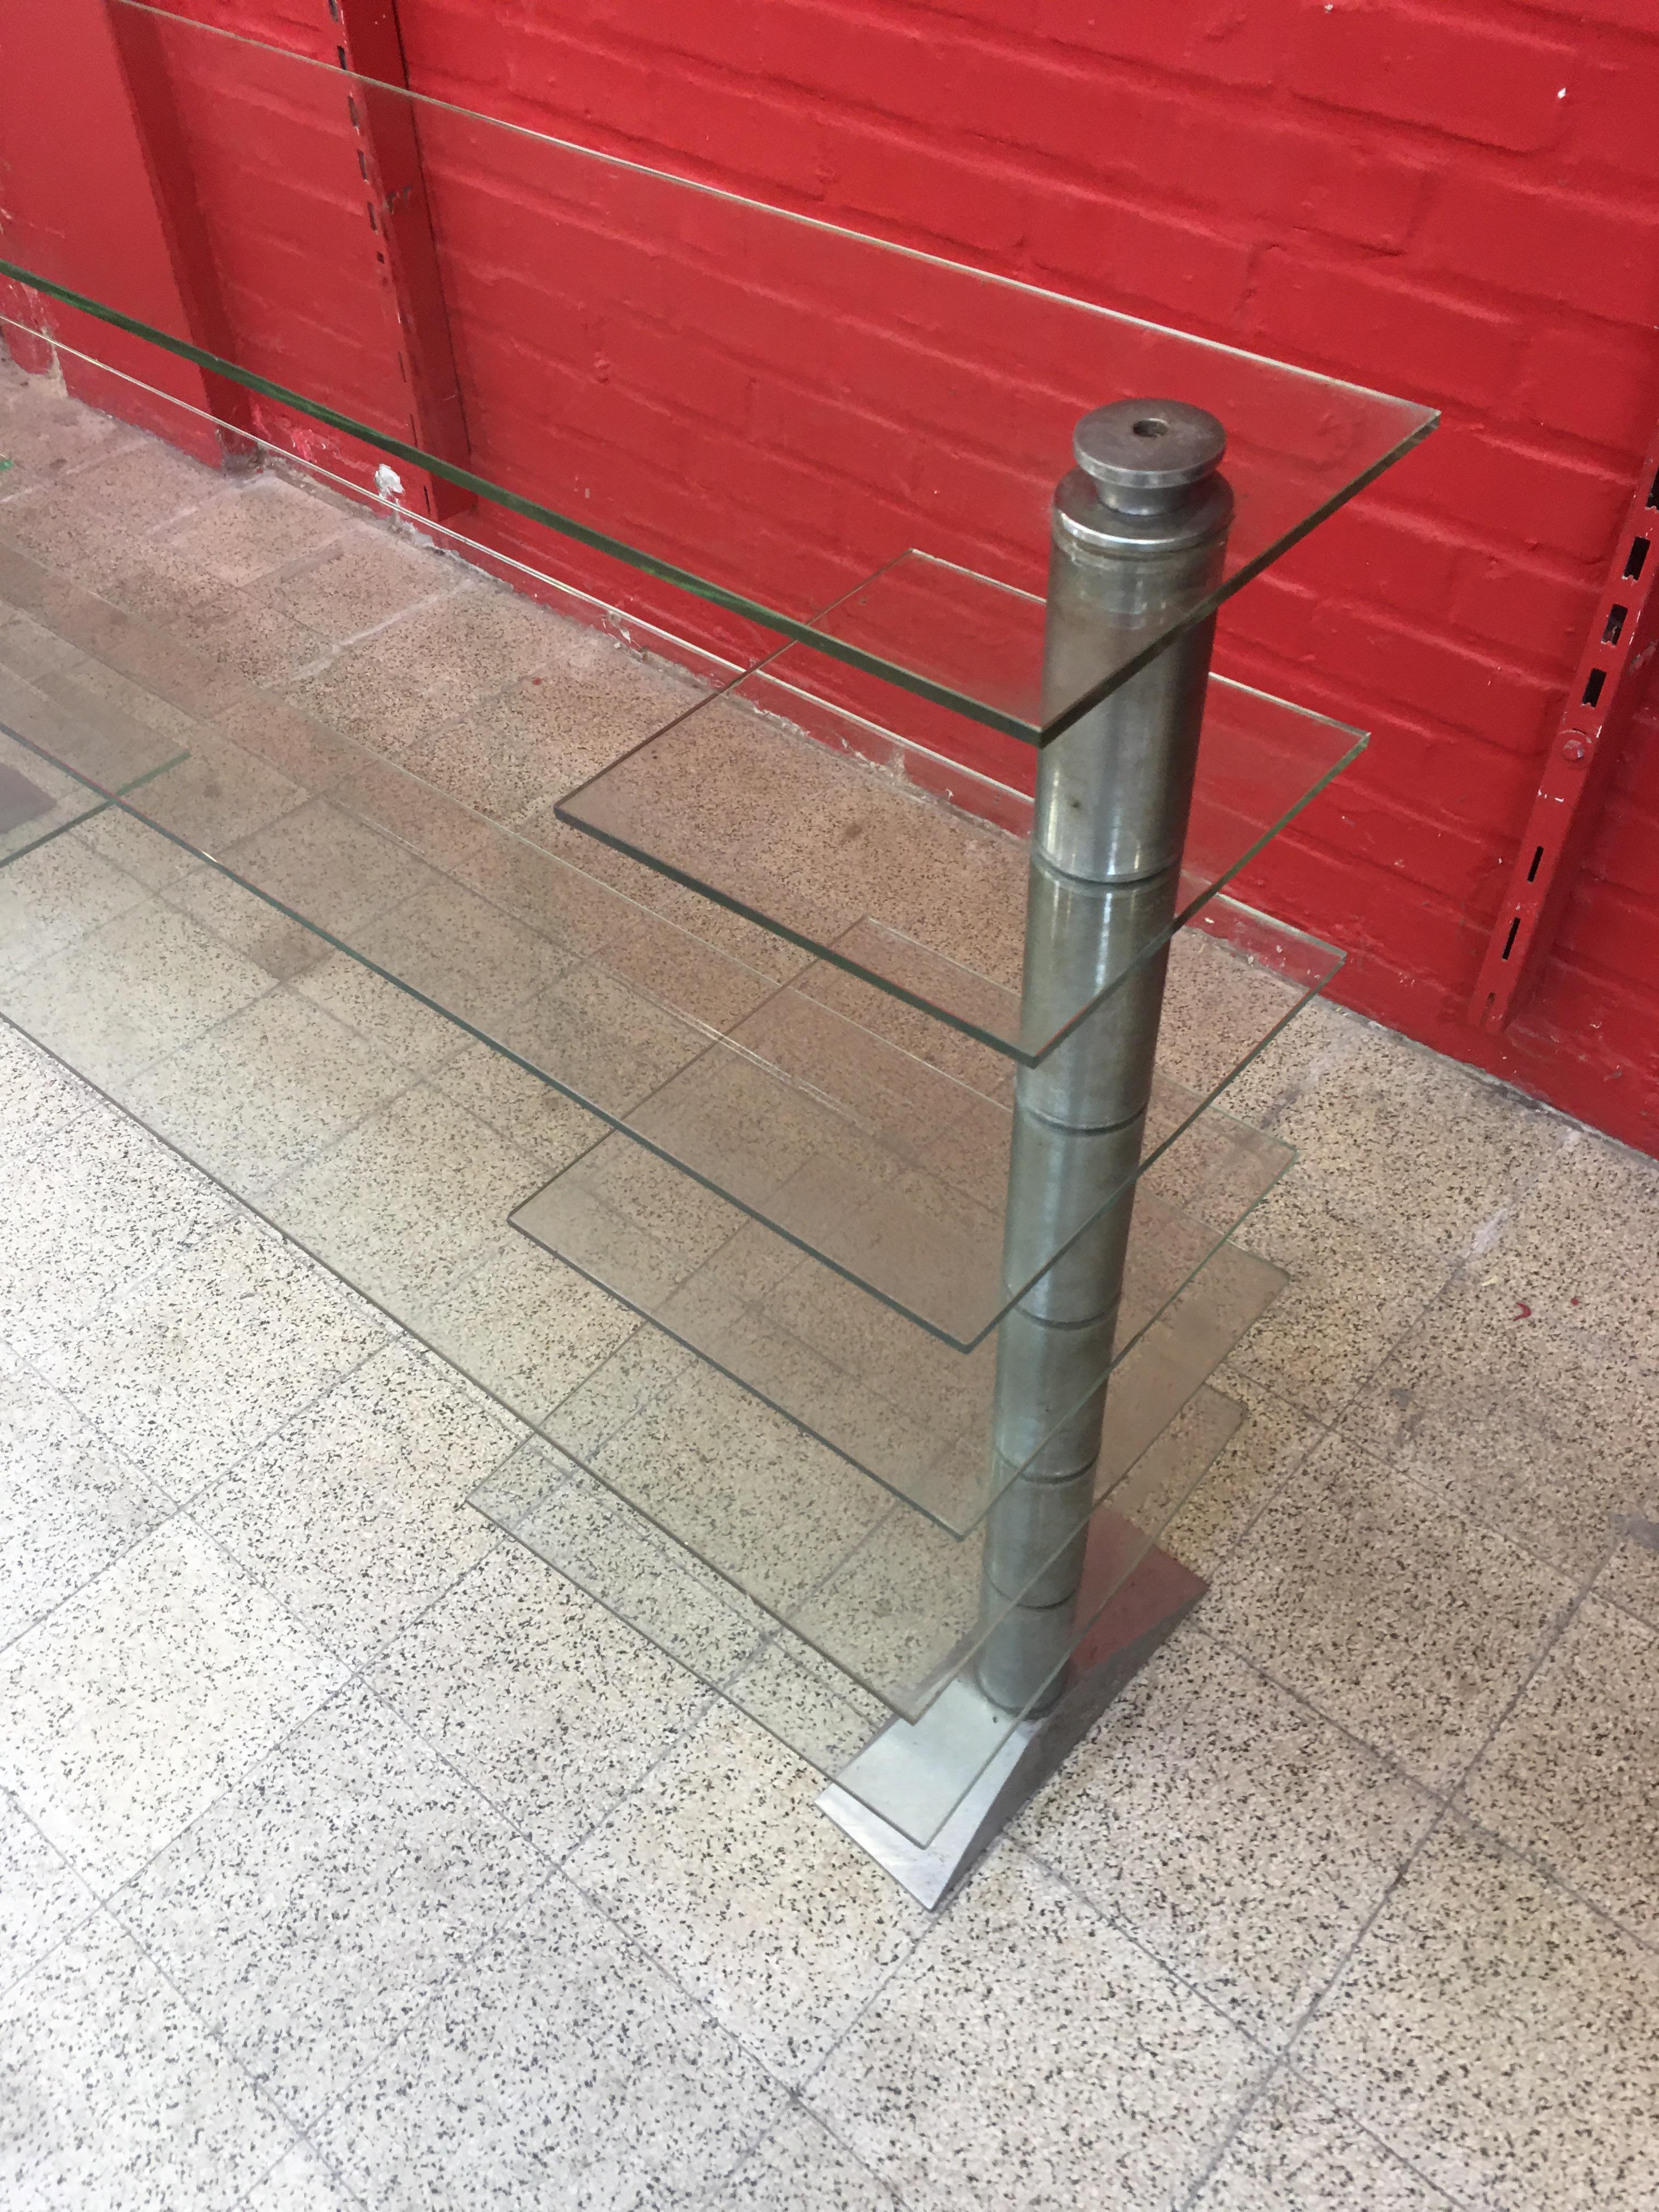 Old store shelf, Art Deco period, steel and safety glass, circa 1930
these shelves were often used in bakeries or other stores.
Often used on a counter, or in a shop window.
Authentic and in very good condition.
The 3 large shelves are fixed,